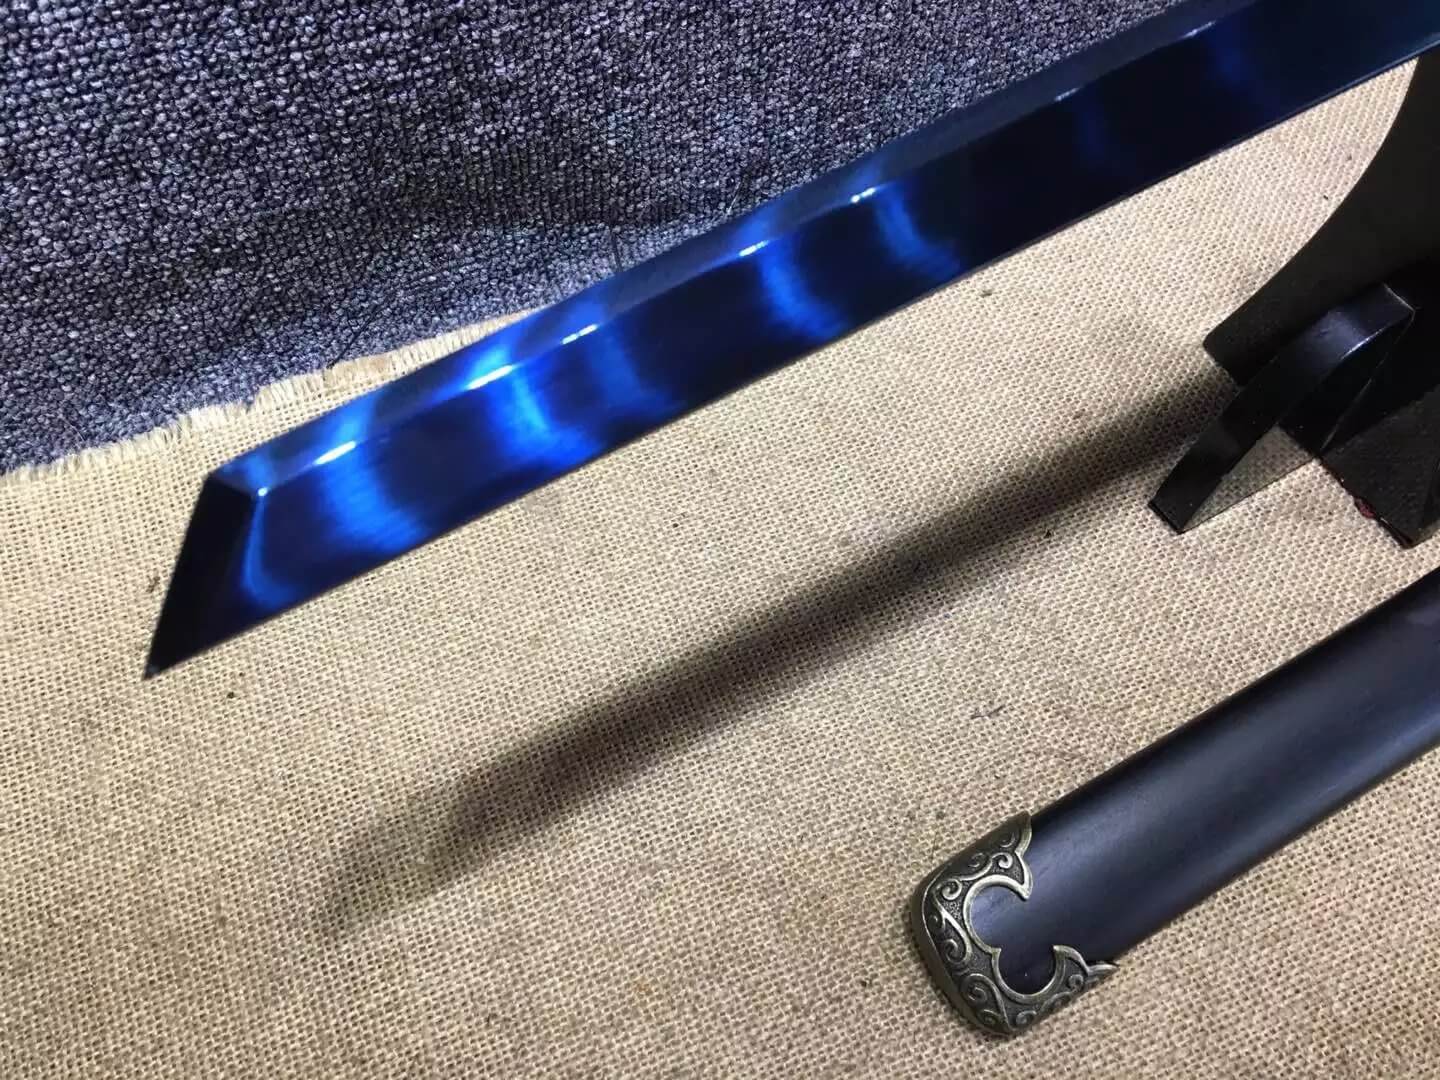 Tang dao,High carbon steel blue blade,Black wood,Alloy,Full tang - Chinese sword shop